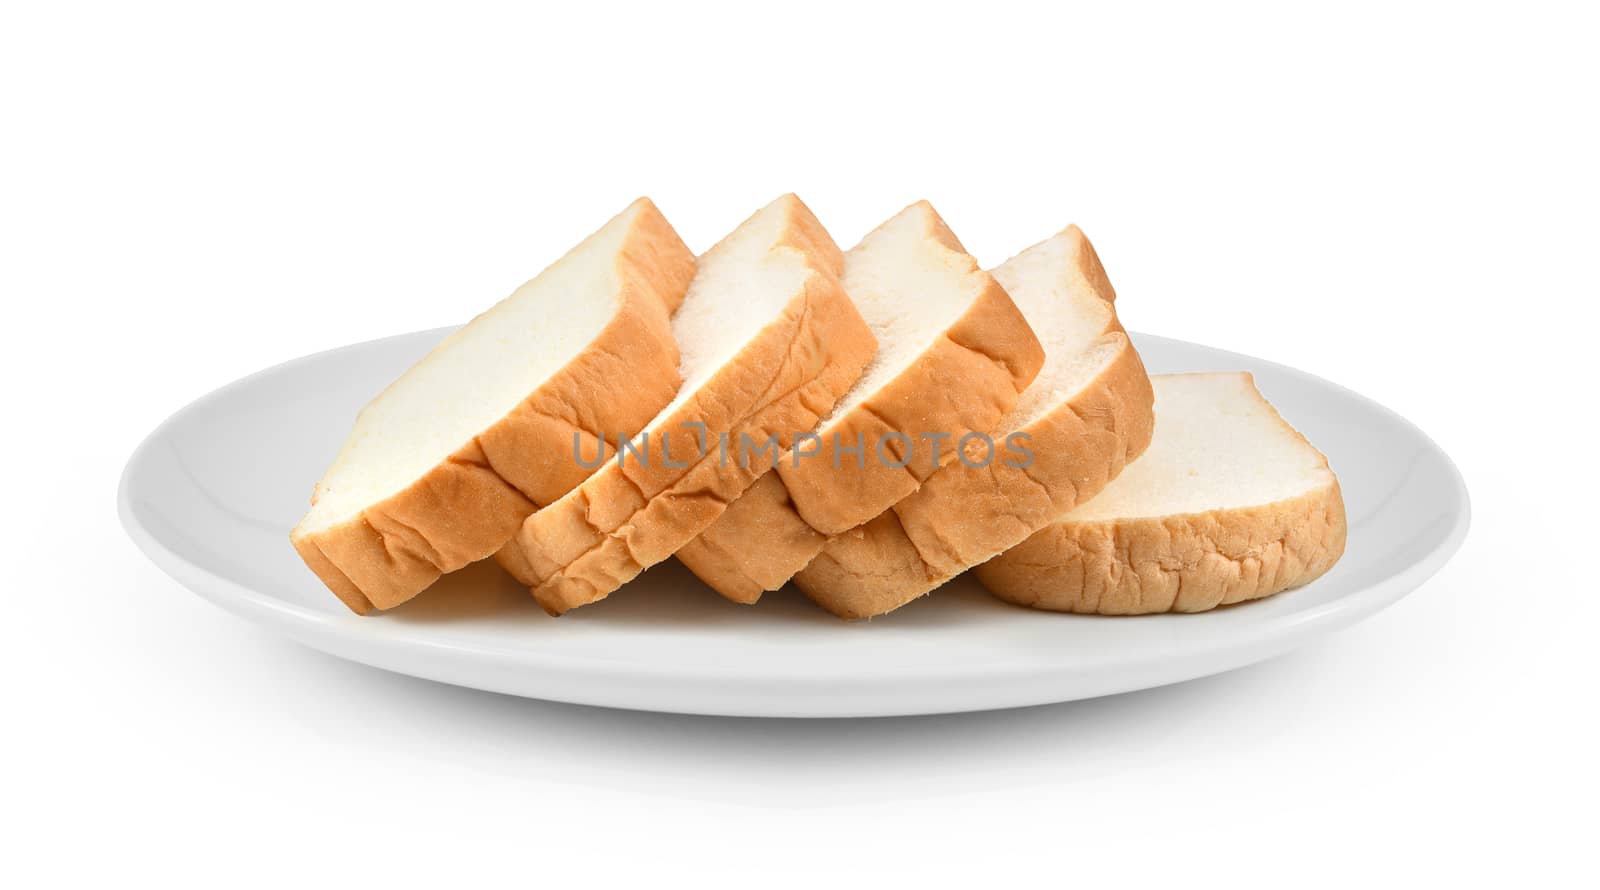 sliced bread in plate isolated on white background